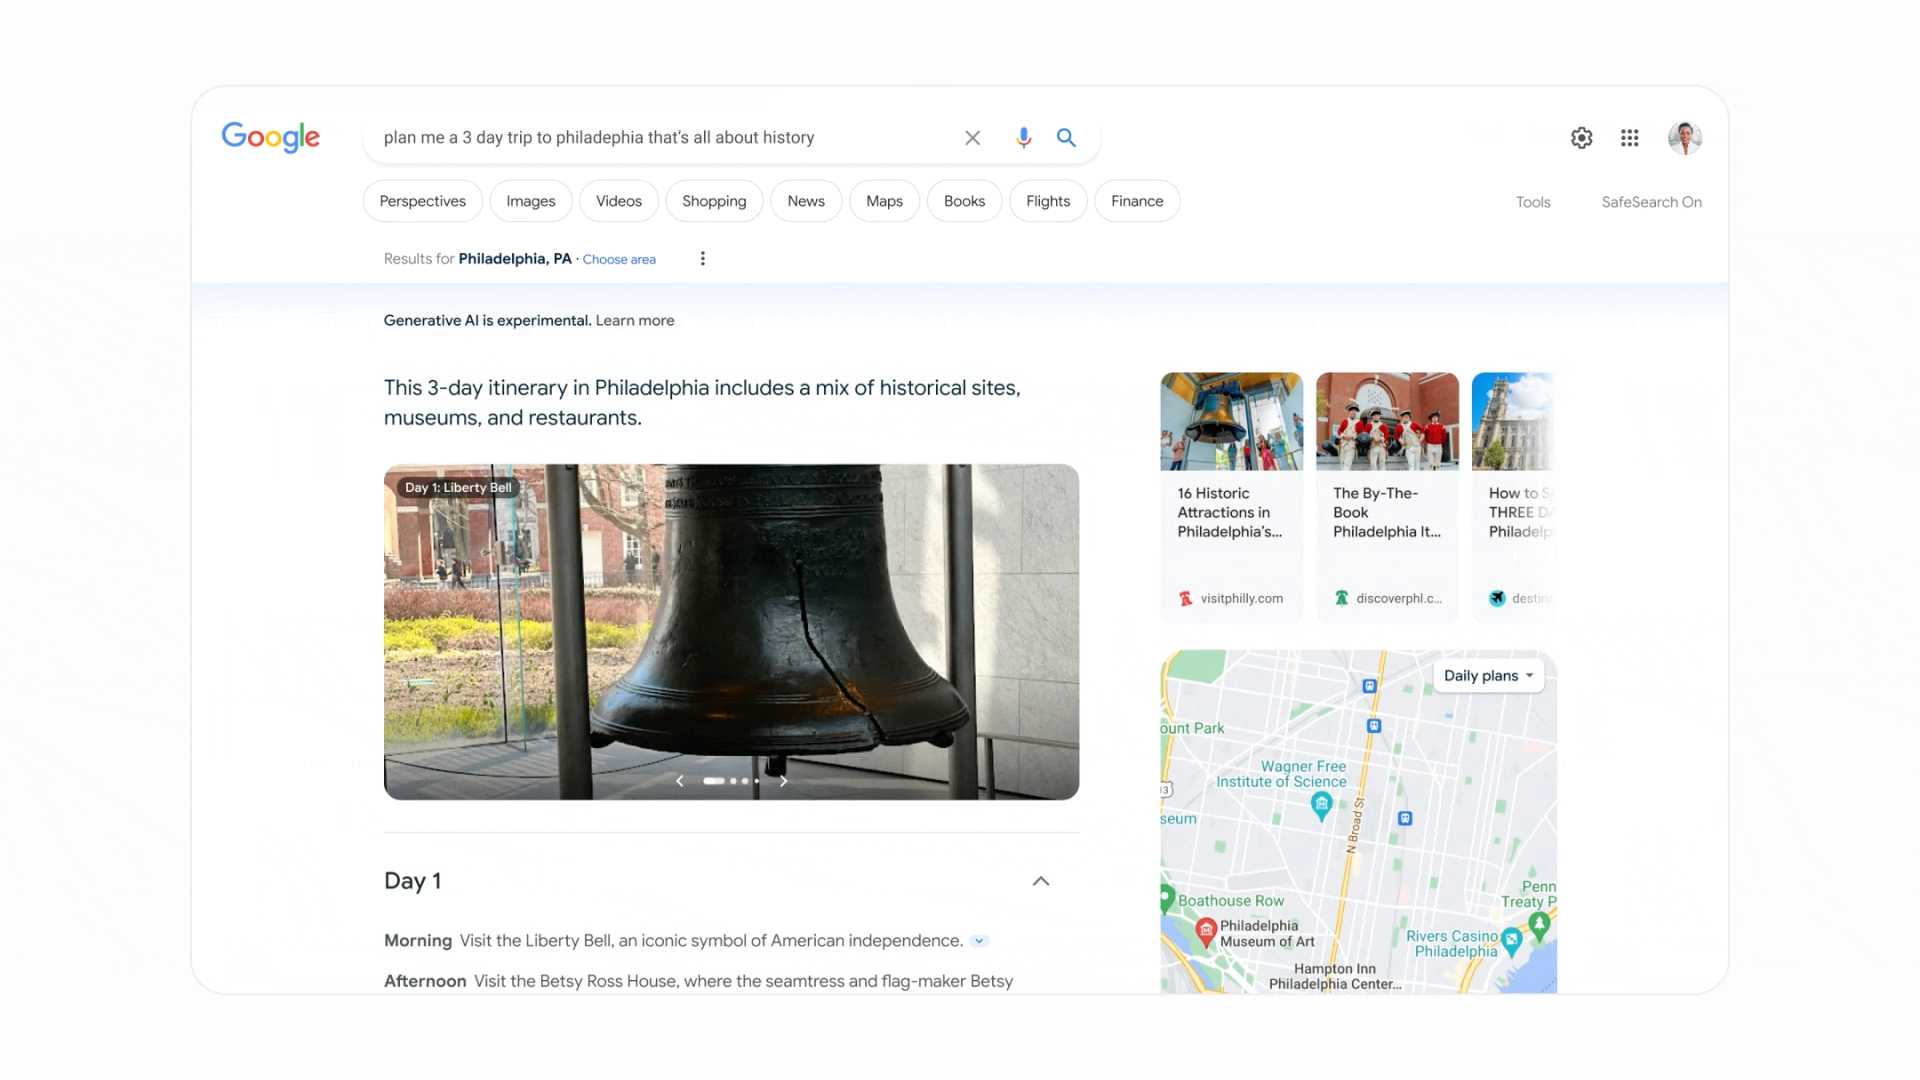 Google SGE search result showing a 3-day itinerary for a trip to Philadelphia